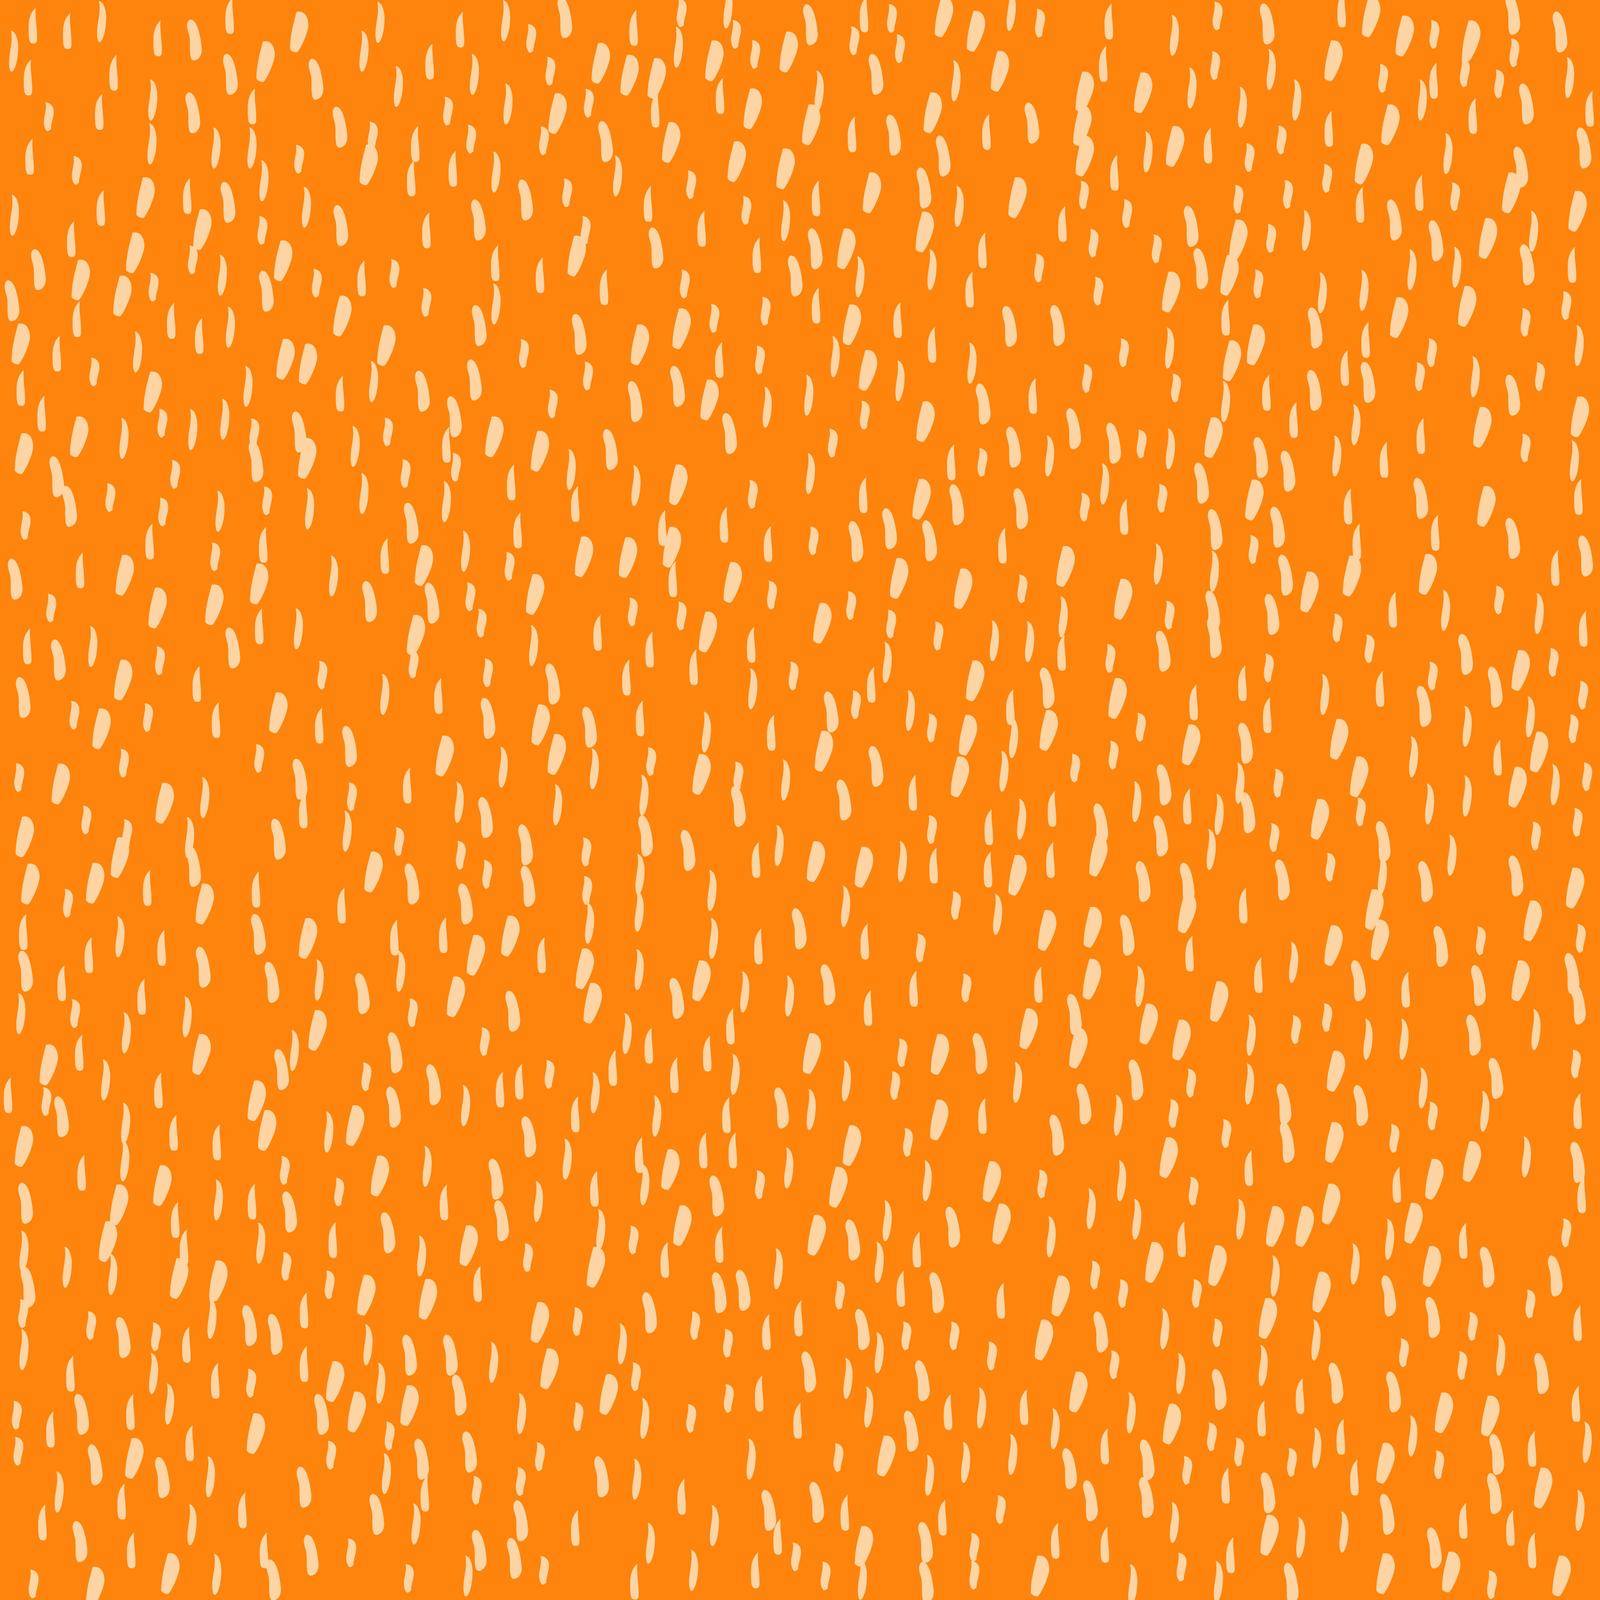 Doodle orange background in vector. For web, textures, textile. 